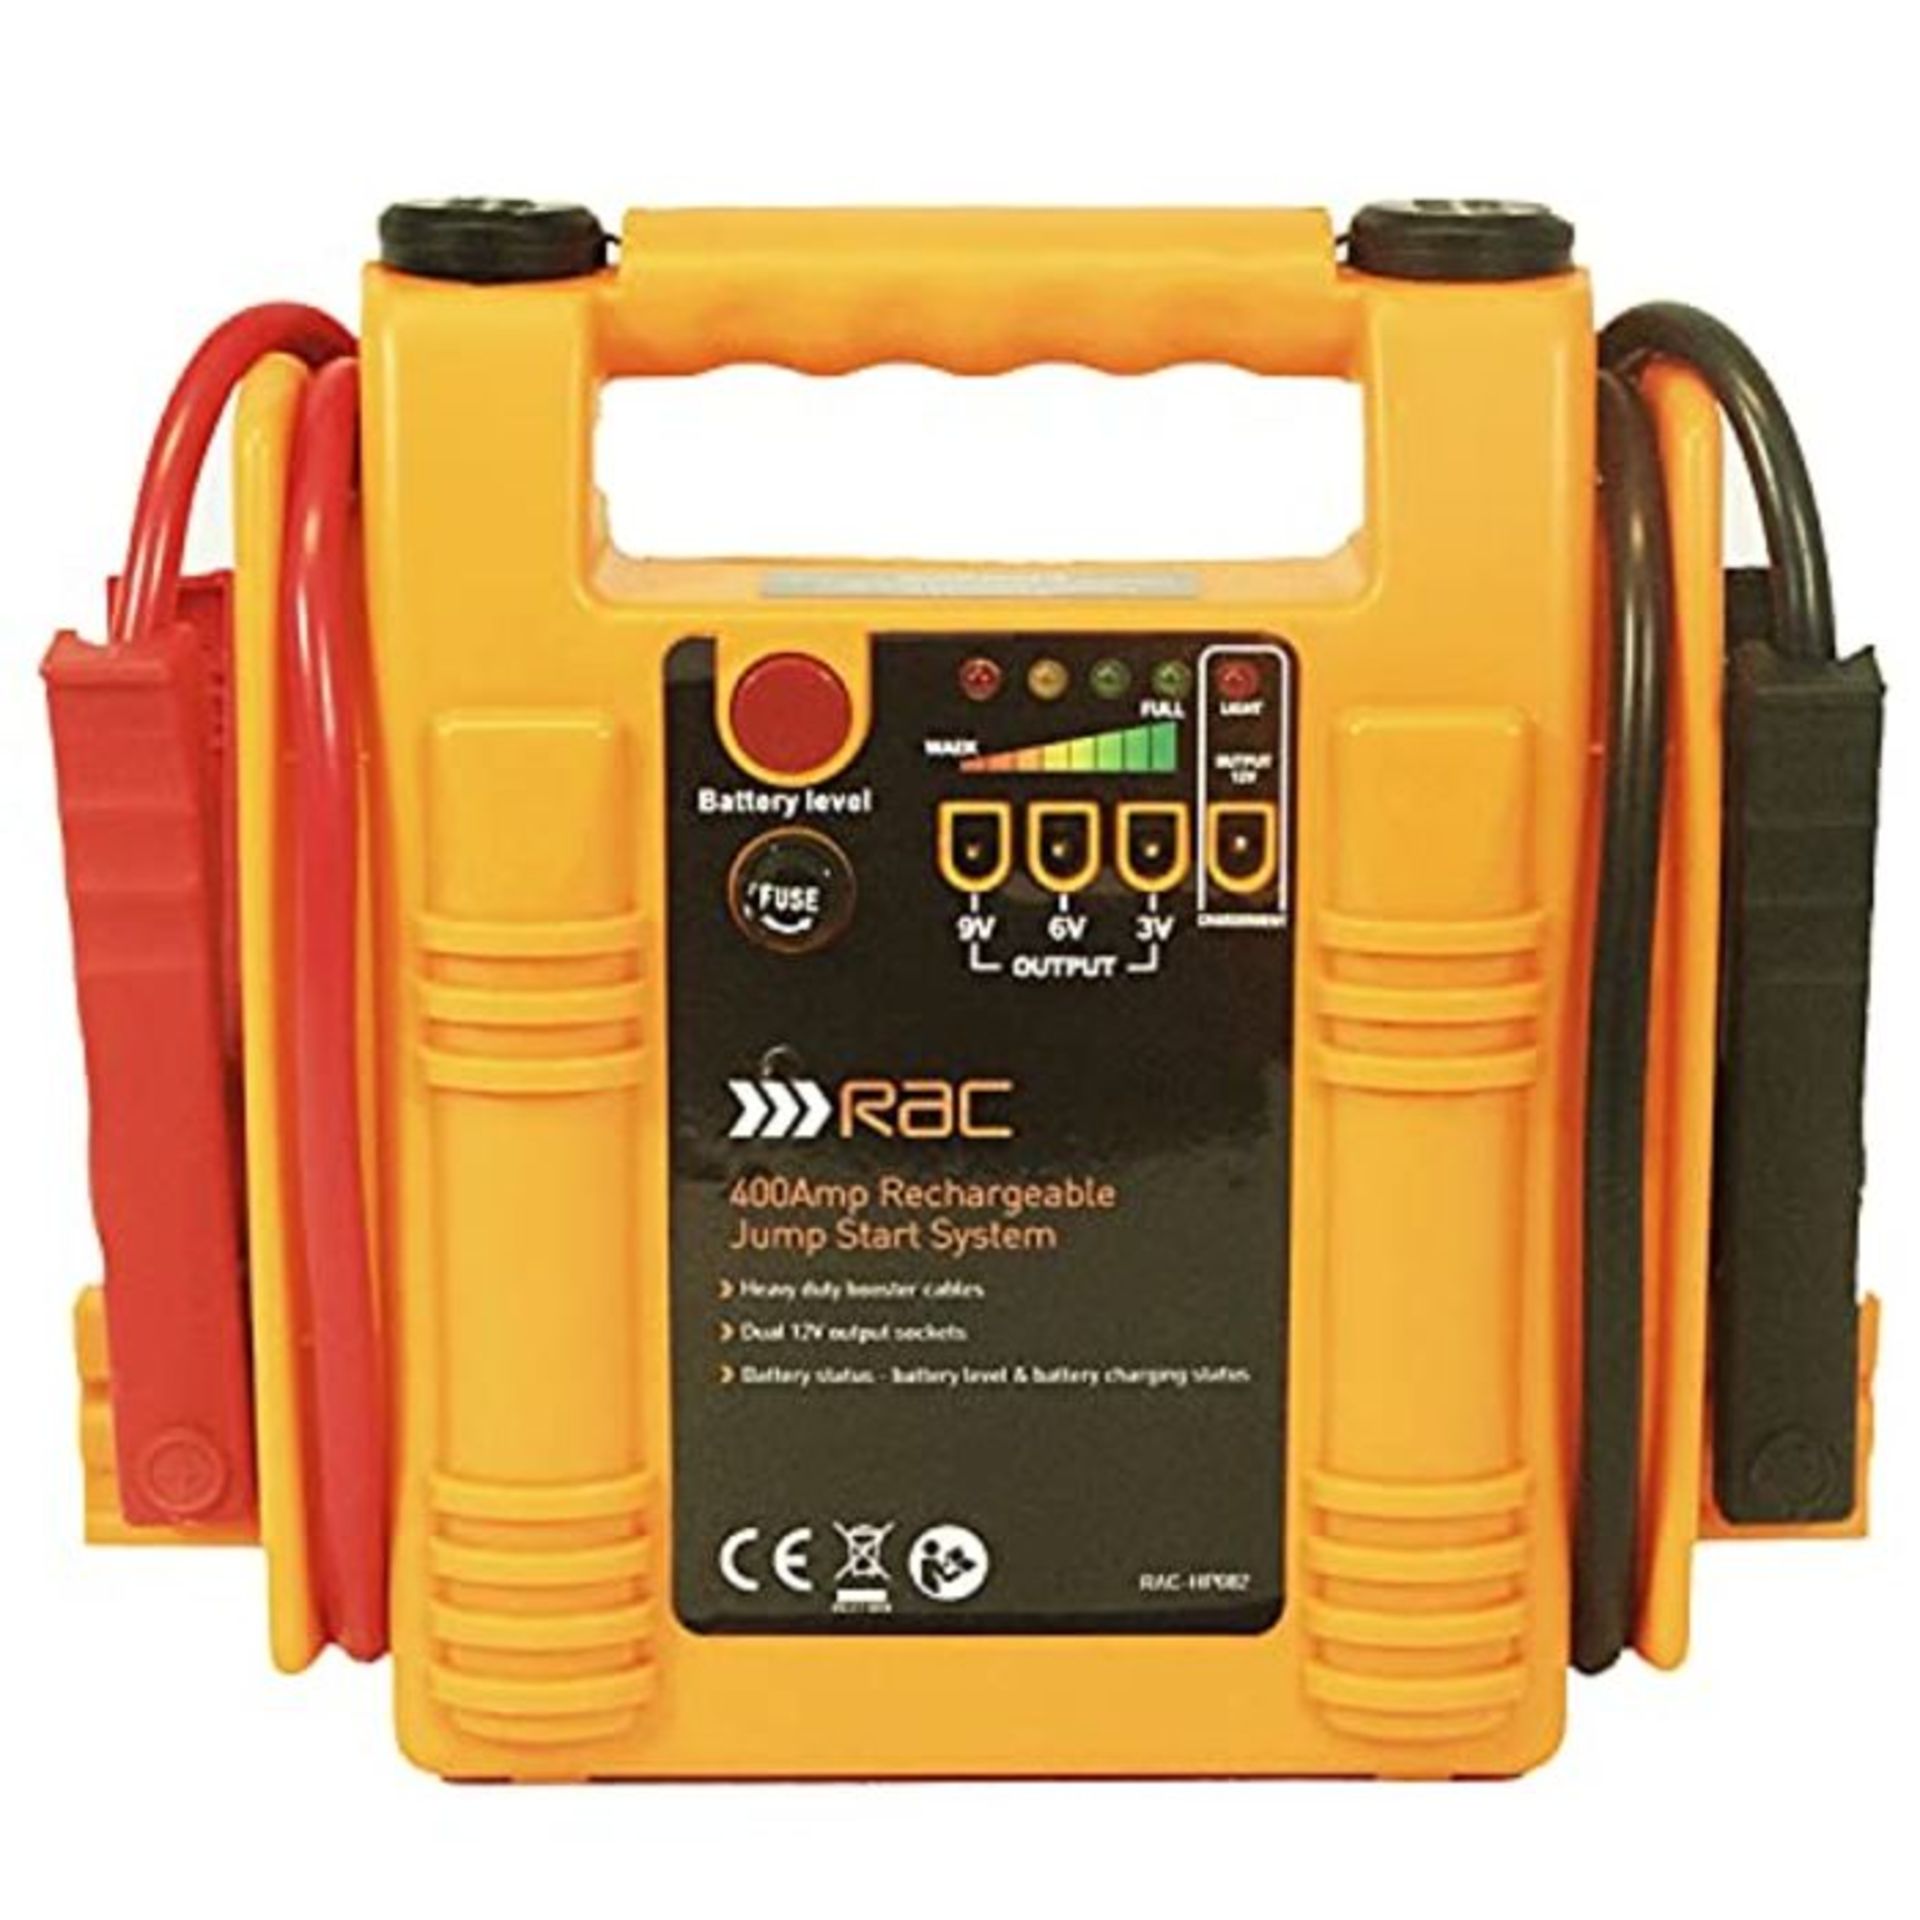 [CRACKED] RAC 400 Amp Rechargeable Jump Start System HP082 - For Car Batteries up to 1